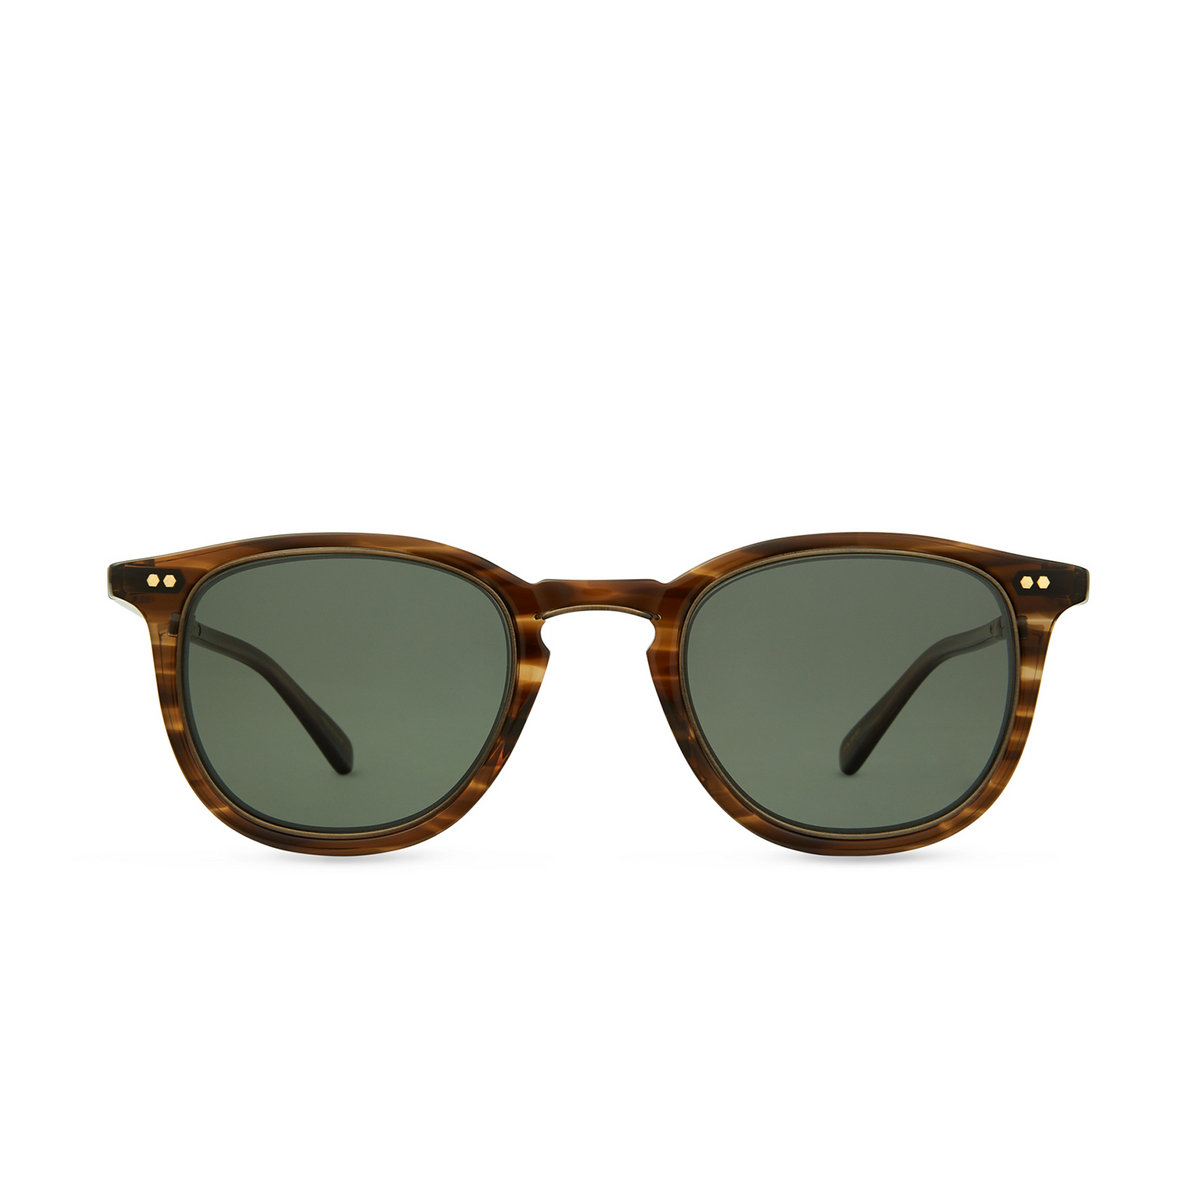 Mr. Leight COOPERS S Sunglasses TOB-ATG/G15 PLR - front view